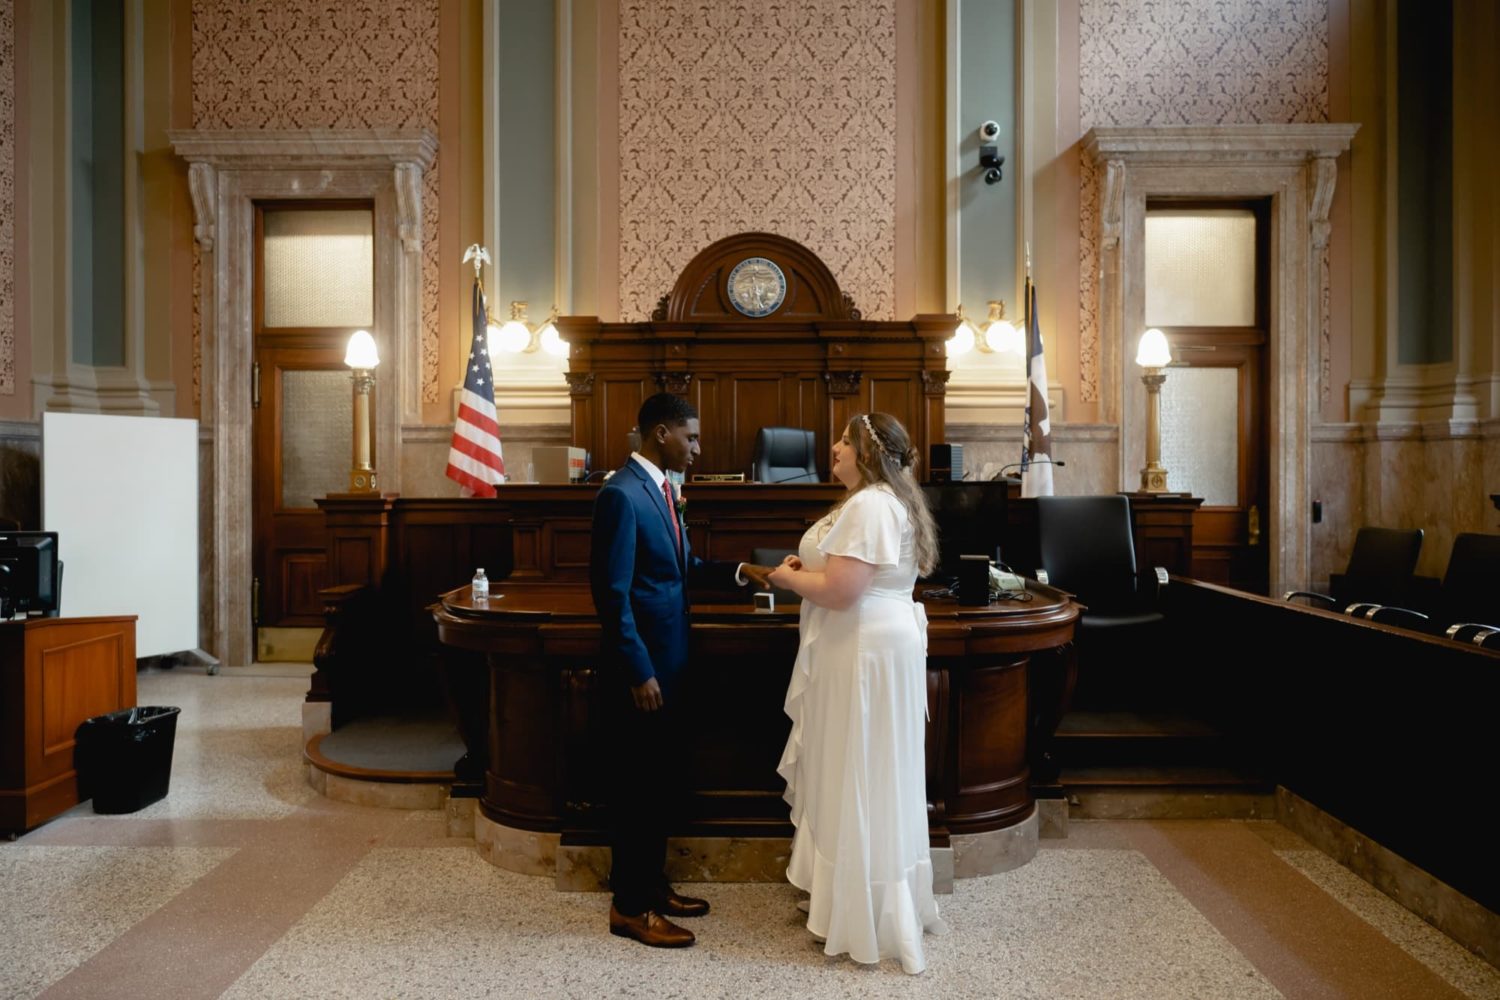 Photographs of getting married in a courthouse